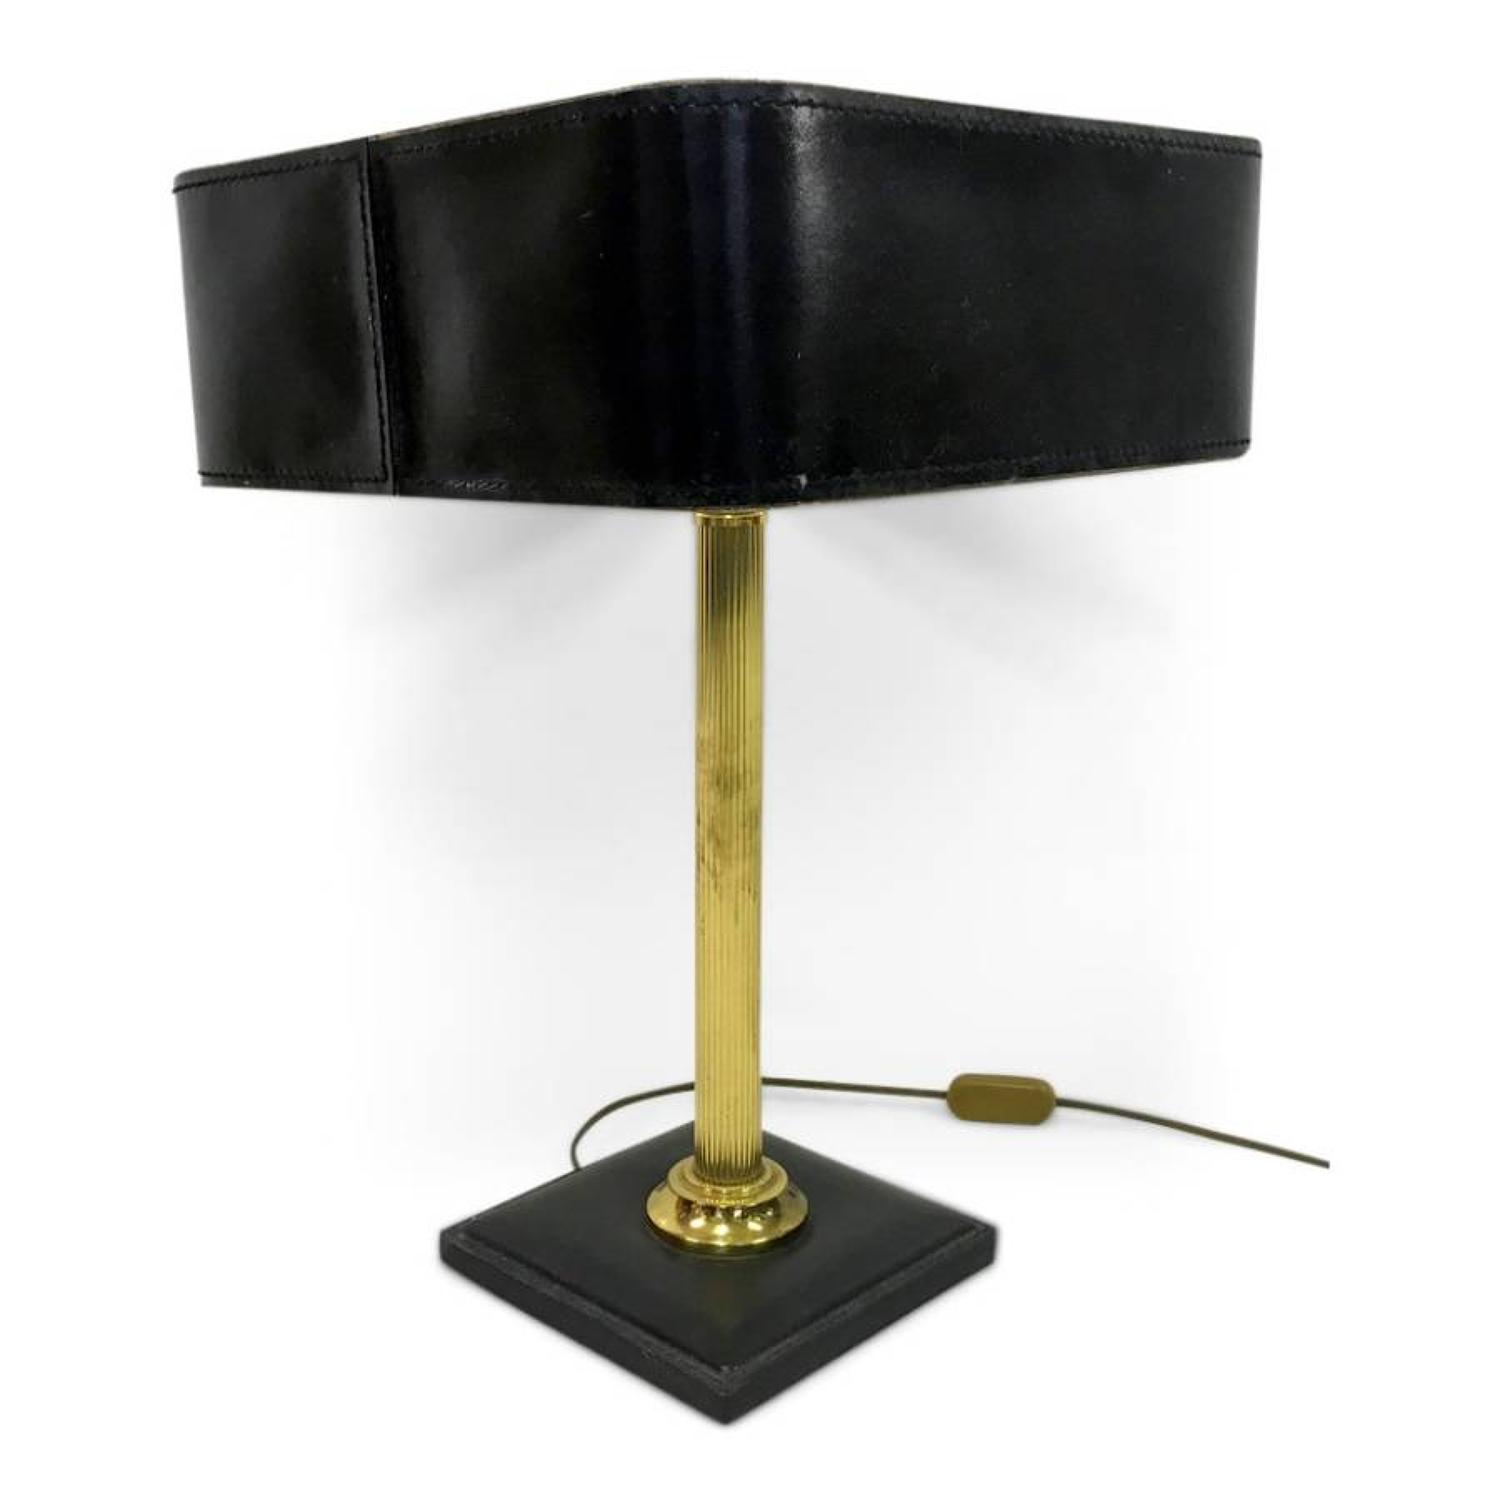 Stitched leather and brass lamp